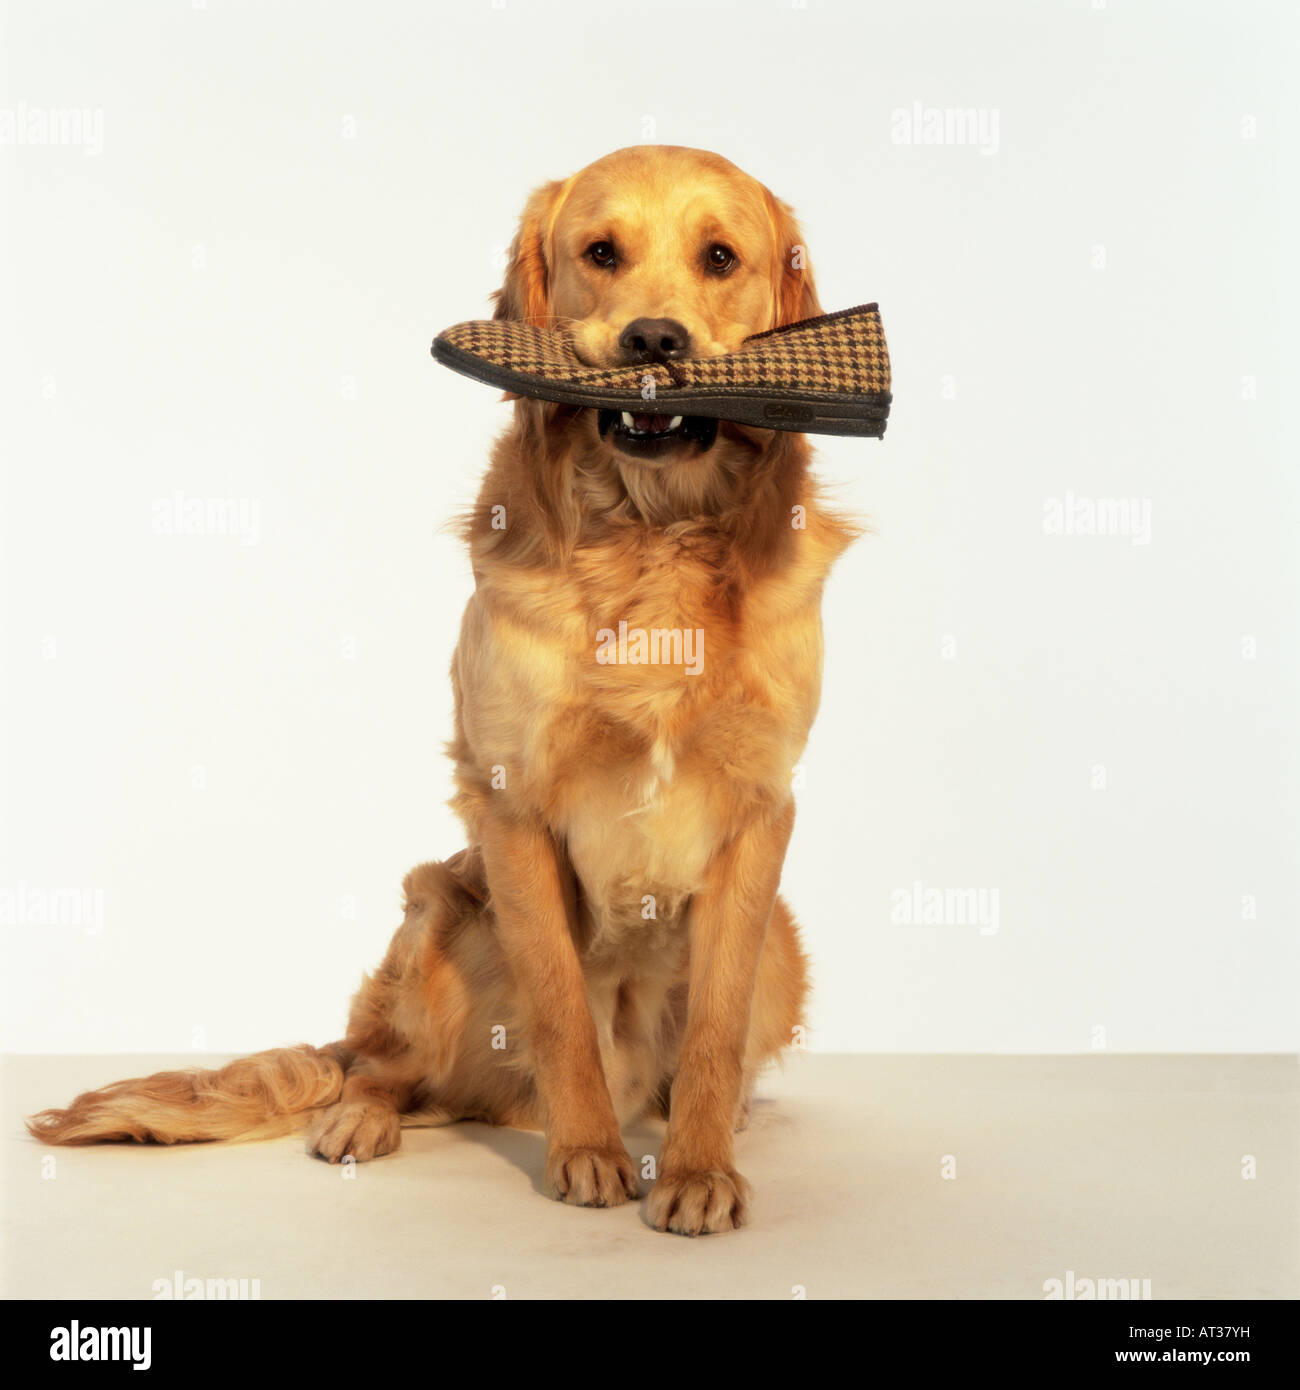 A golden retriever dog with a slipper in it's mouth Stock Photo